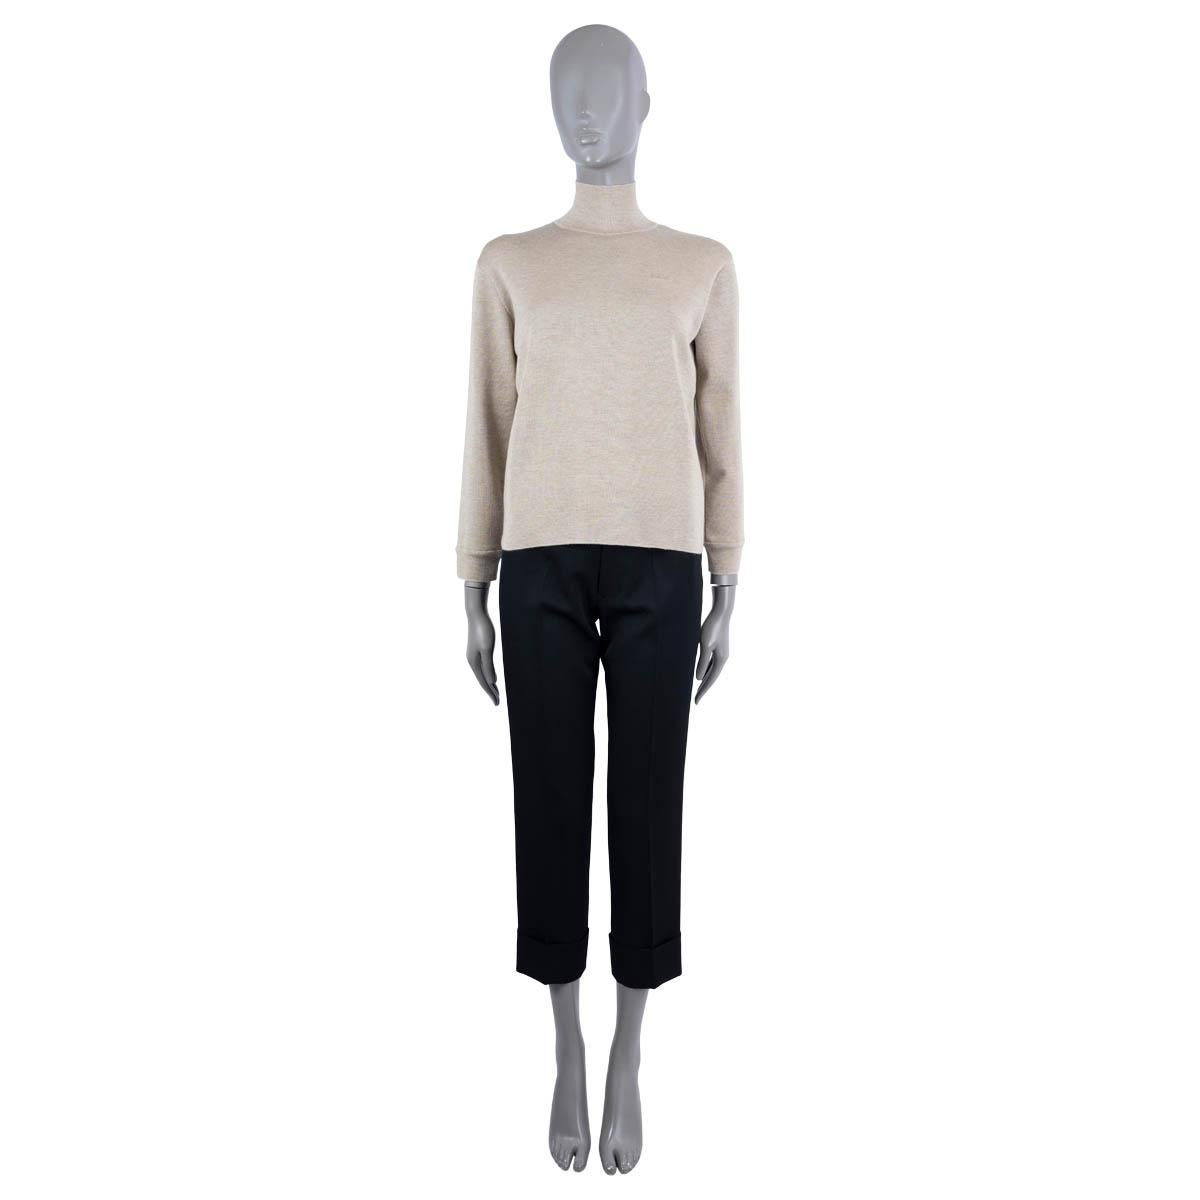 100% authentic Hermès mock neck sweater in taupe cashmere (50%) and silk (50%). Features embroidered logo at the chest. Has been worn and is in excellent condition.

2020 Pre-Fall

Measurements
Tag Size 36
Size XS
Shoulder Width	41cm (16in)
Bust